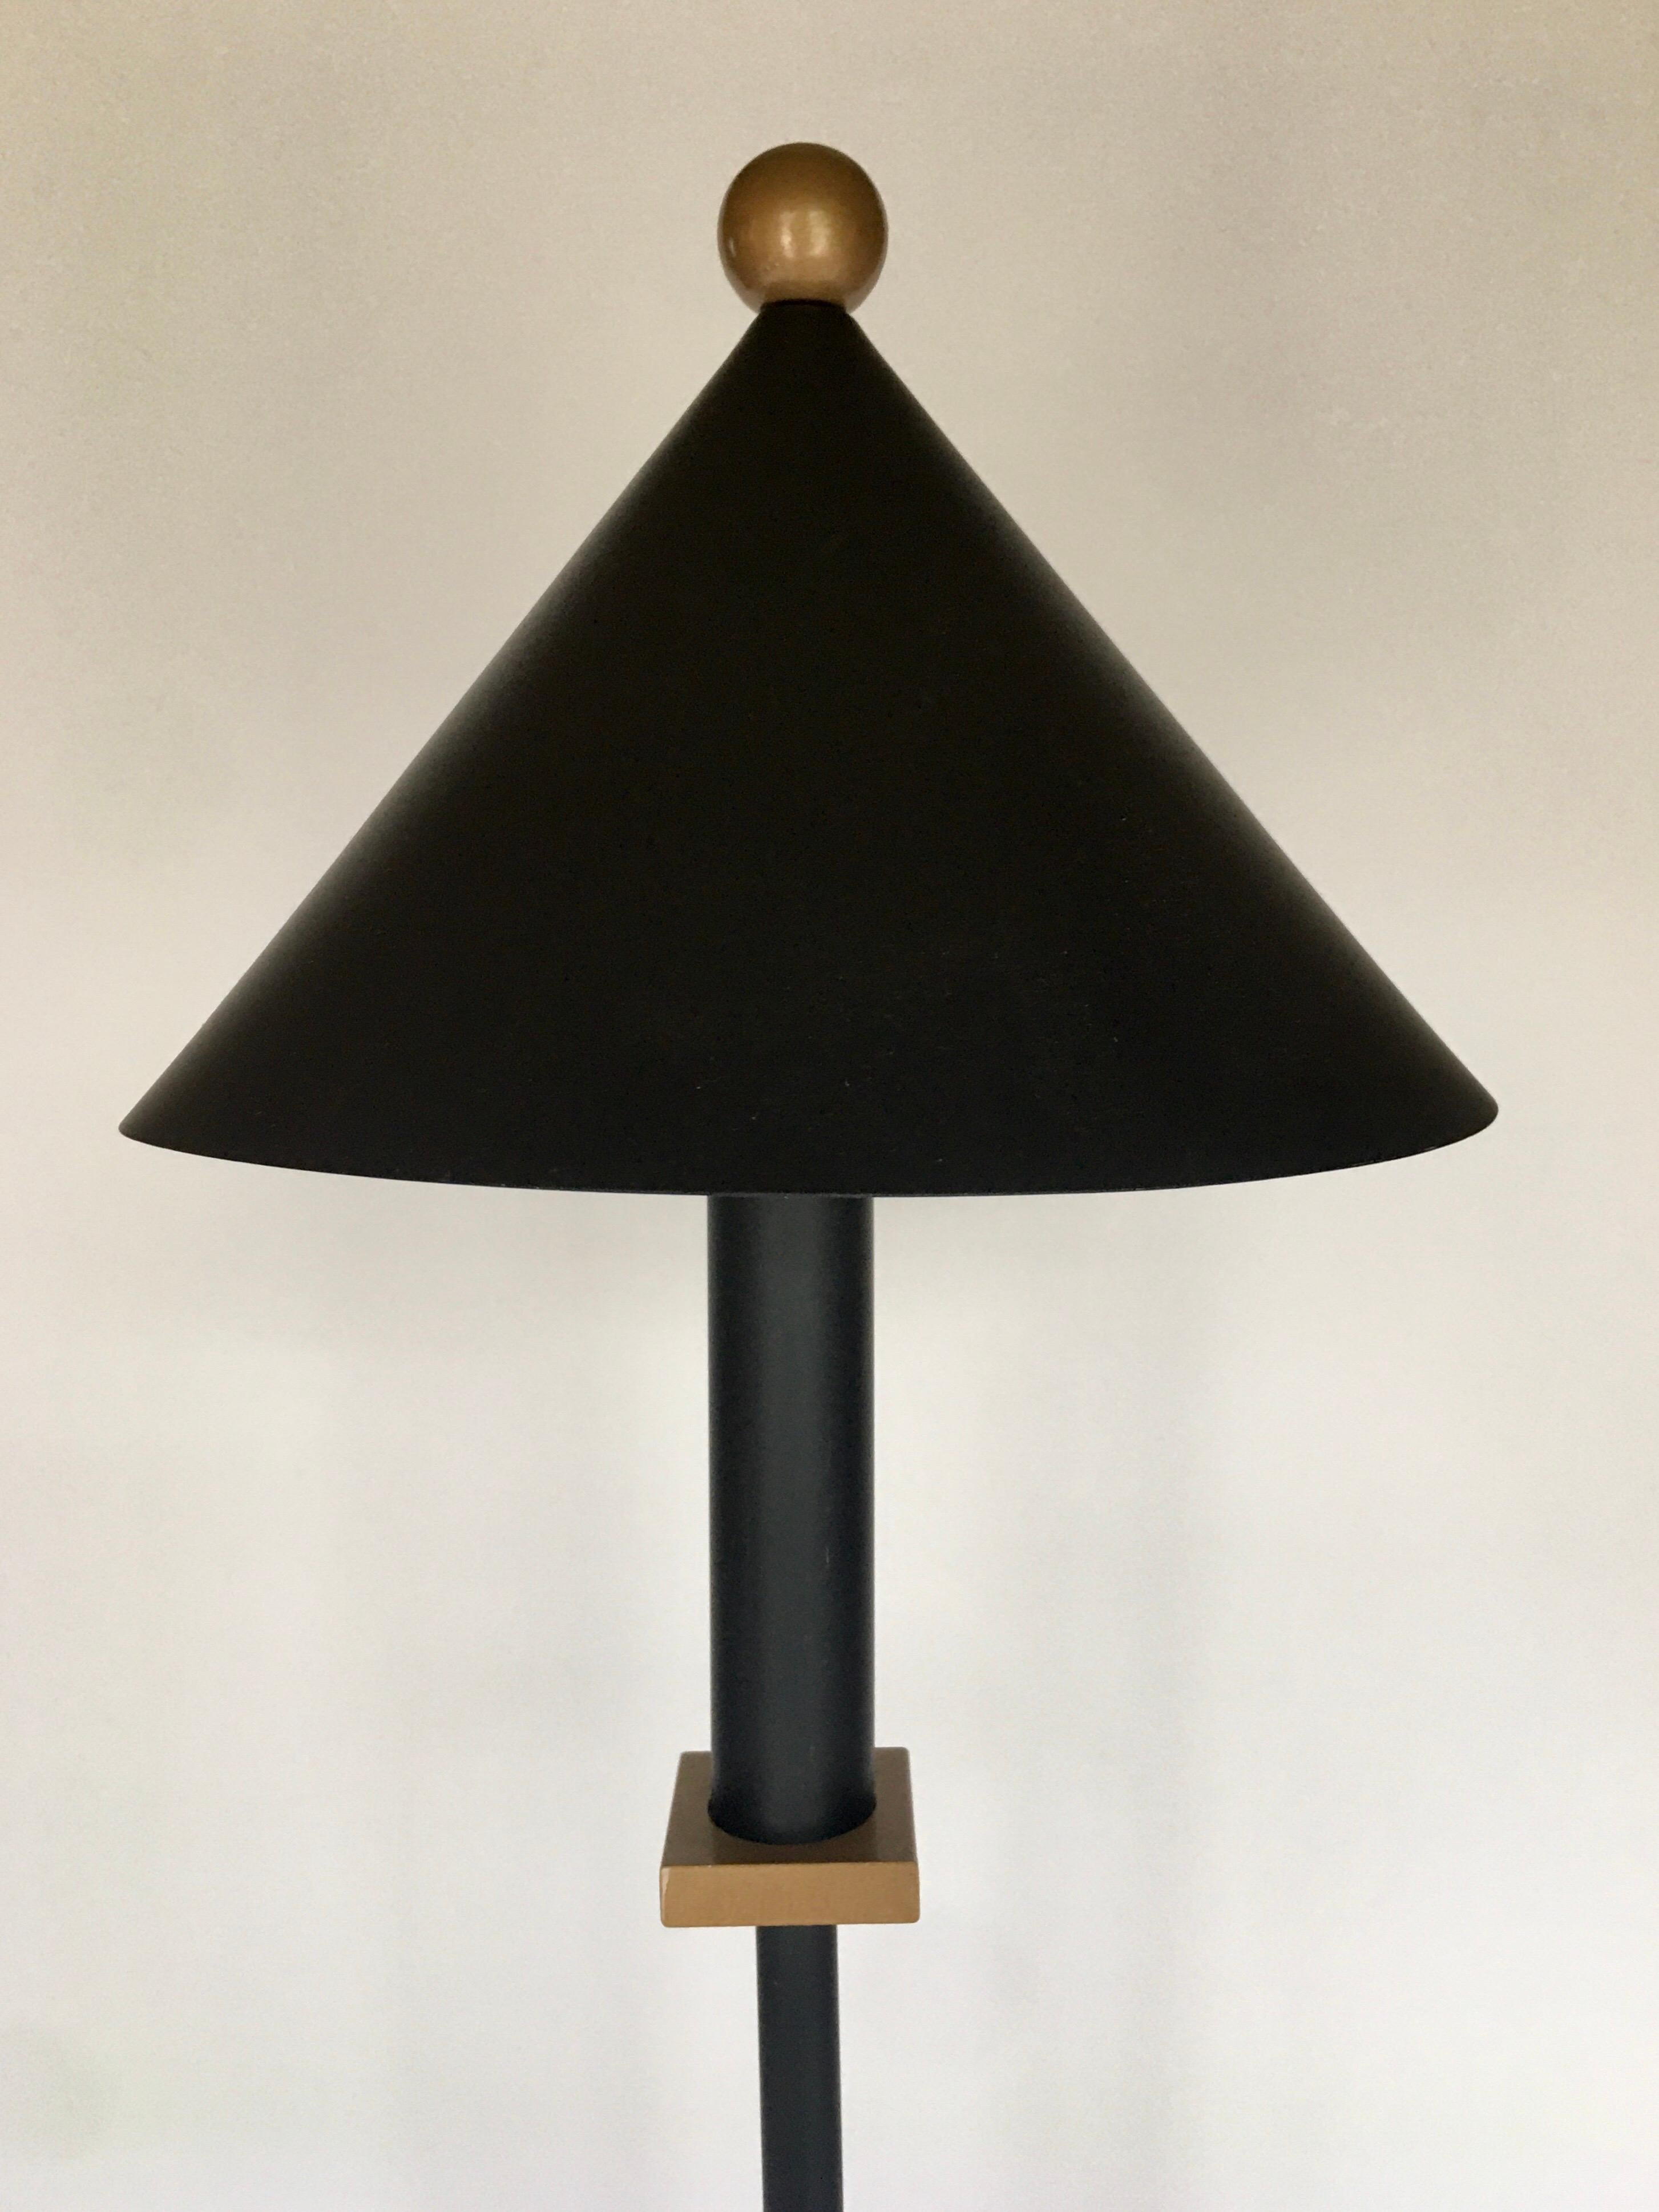 1990s Memphis style Robert Sonneman for George Kovacs table lamp. Sculptural and geometric back metal base with gold accents. Frosted glass light diffuser. Modern triangle cone shaped shade with gold ball top. Halogen bulb. Excellent vintage